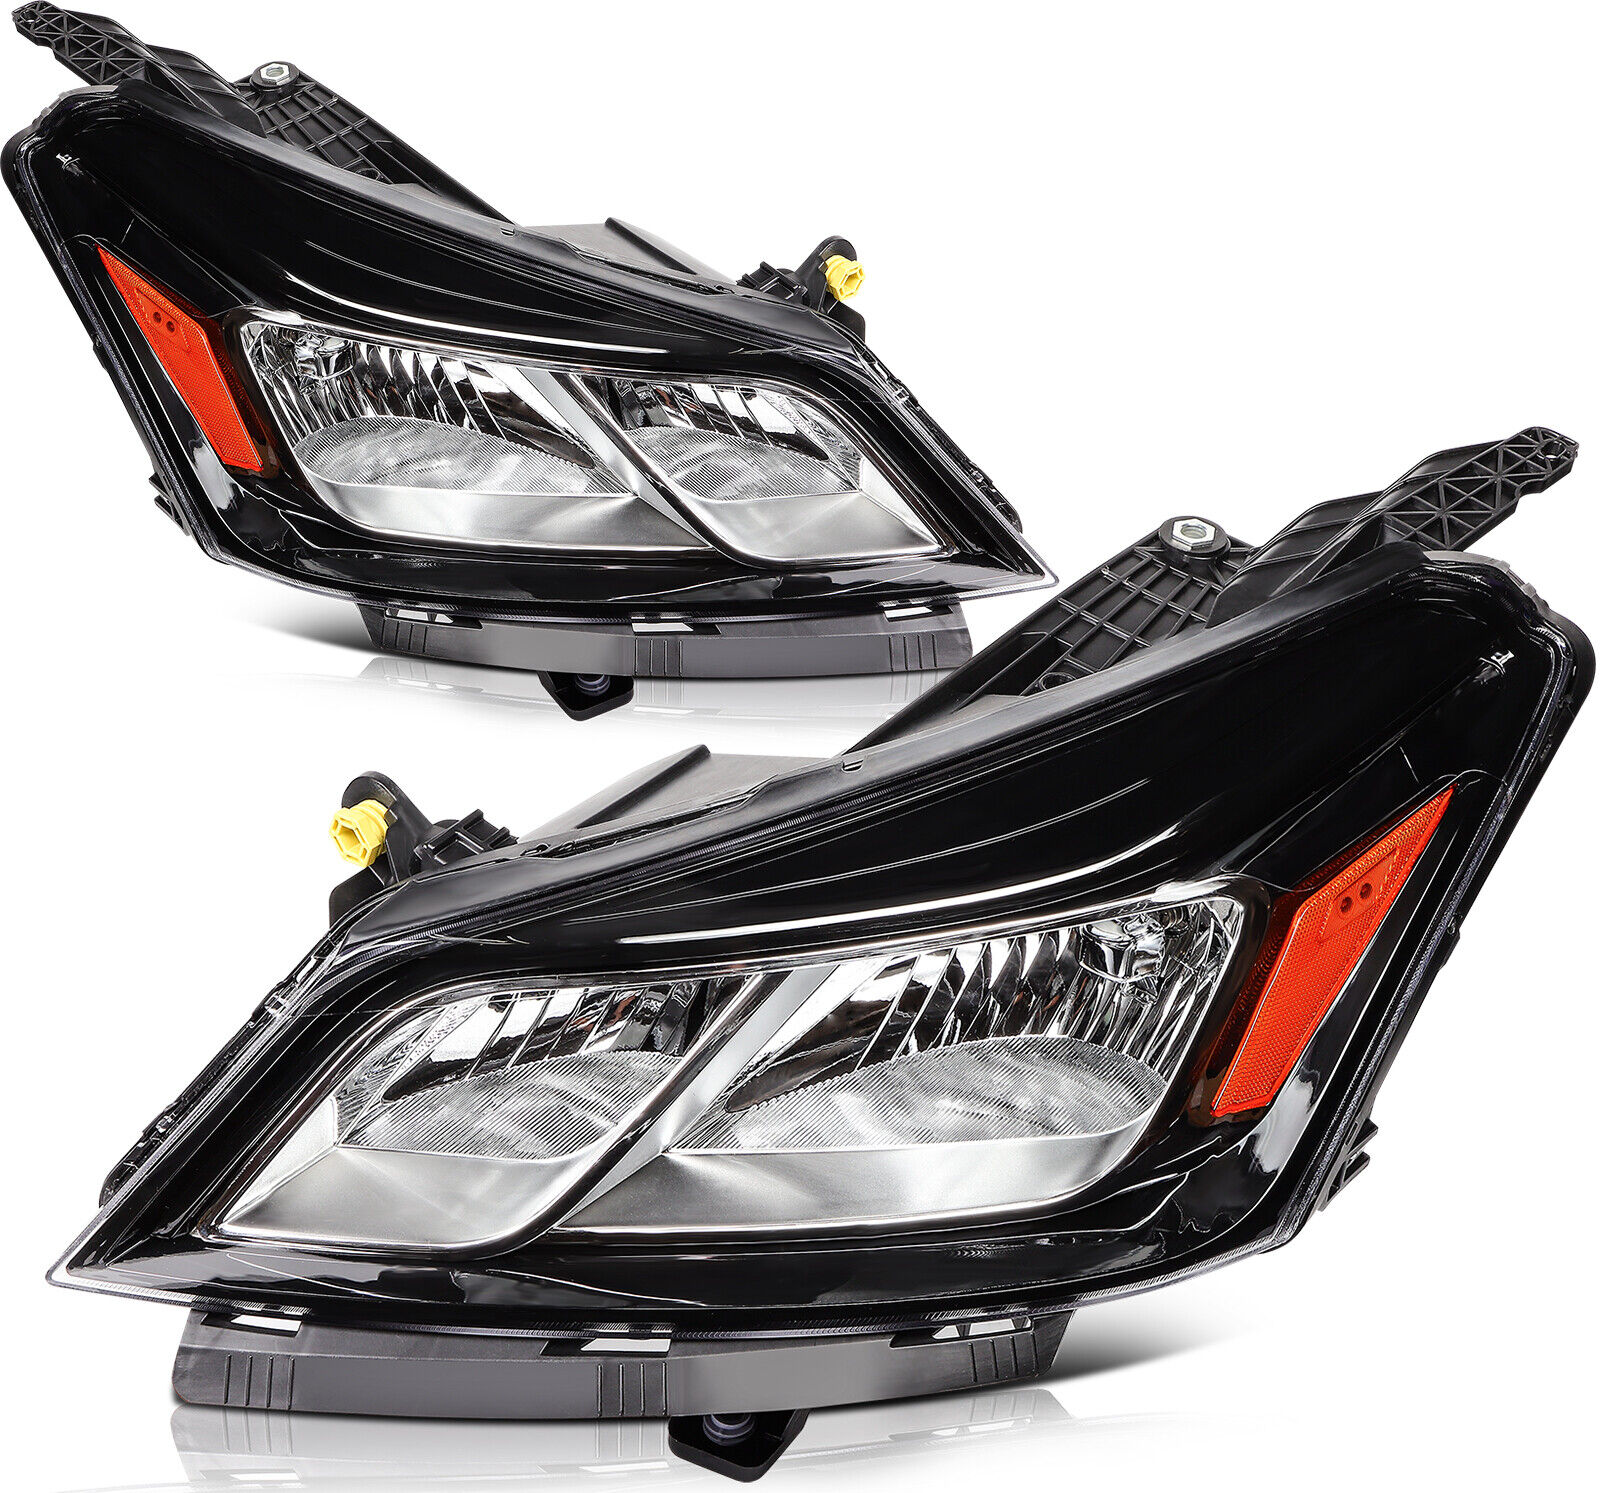 For Chevy Traverse 2013-2017 Front Headlights Assembly Set Black Housing Pair